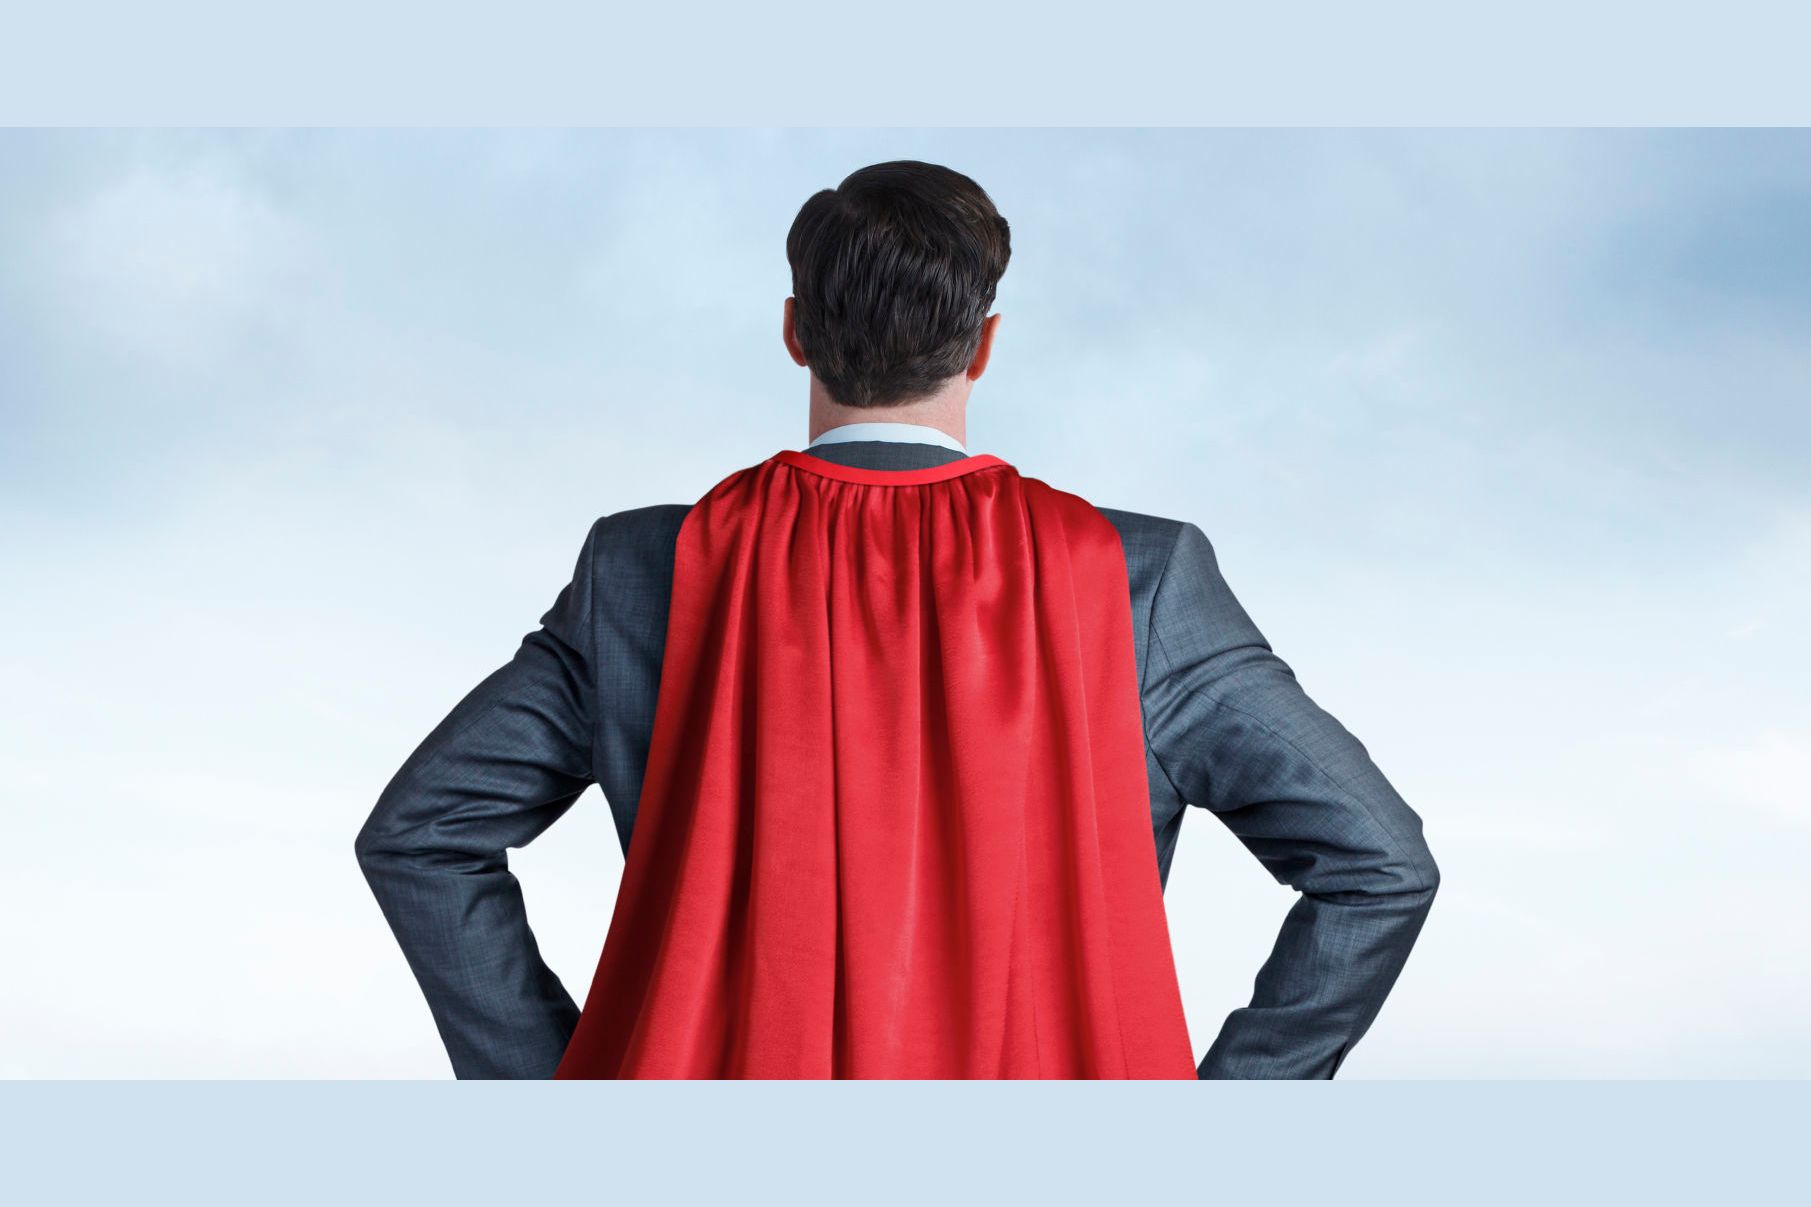 What's your accounting superpower?